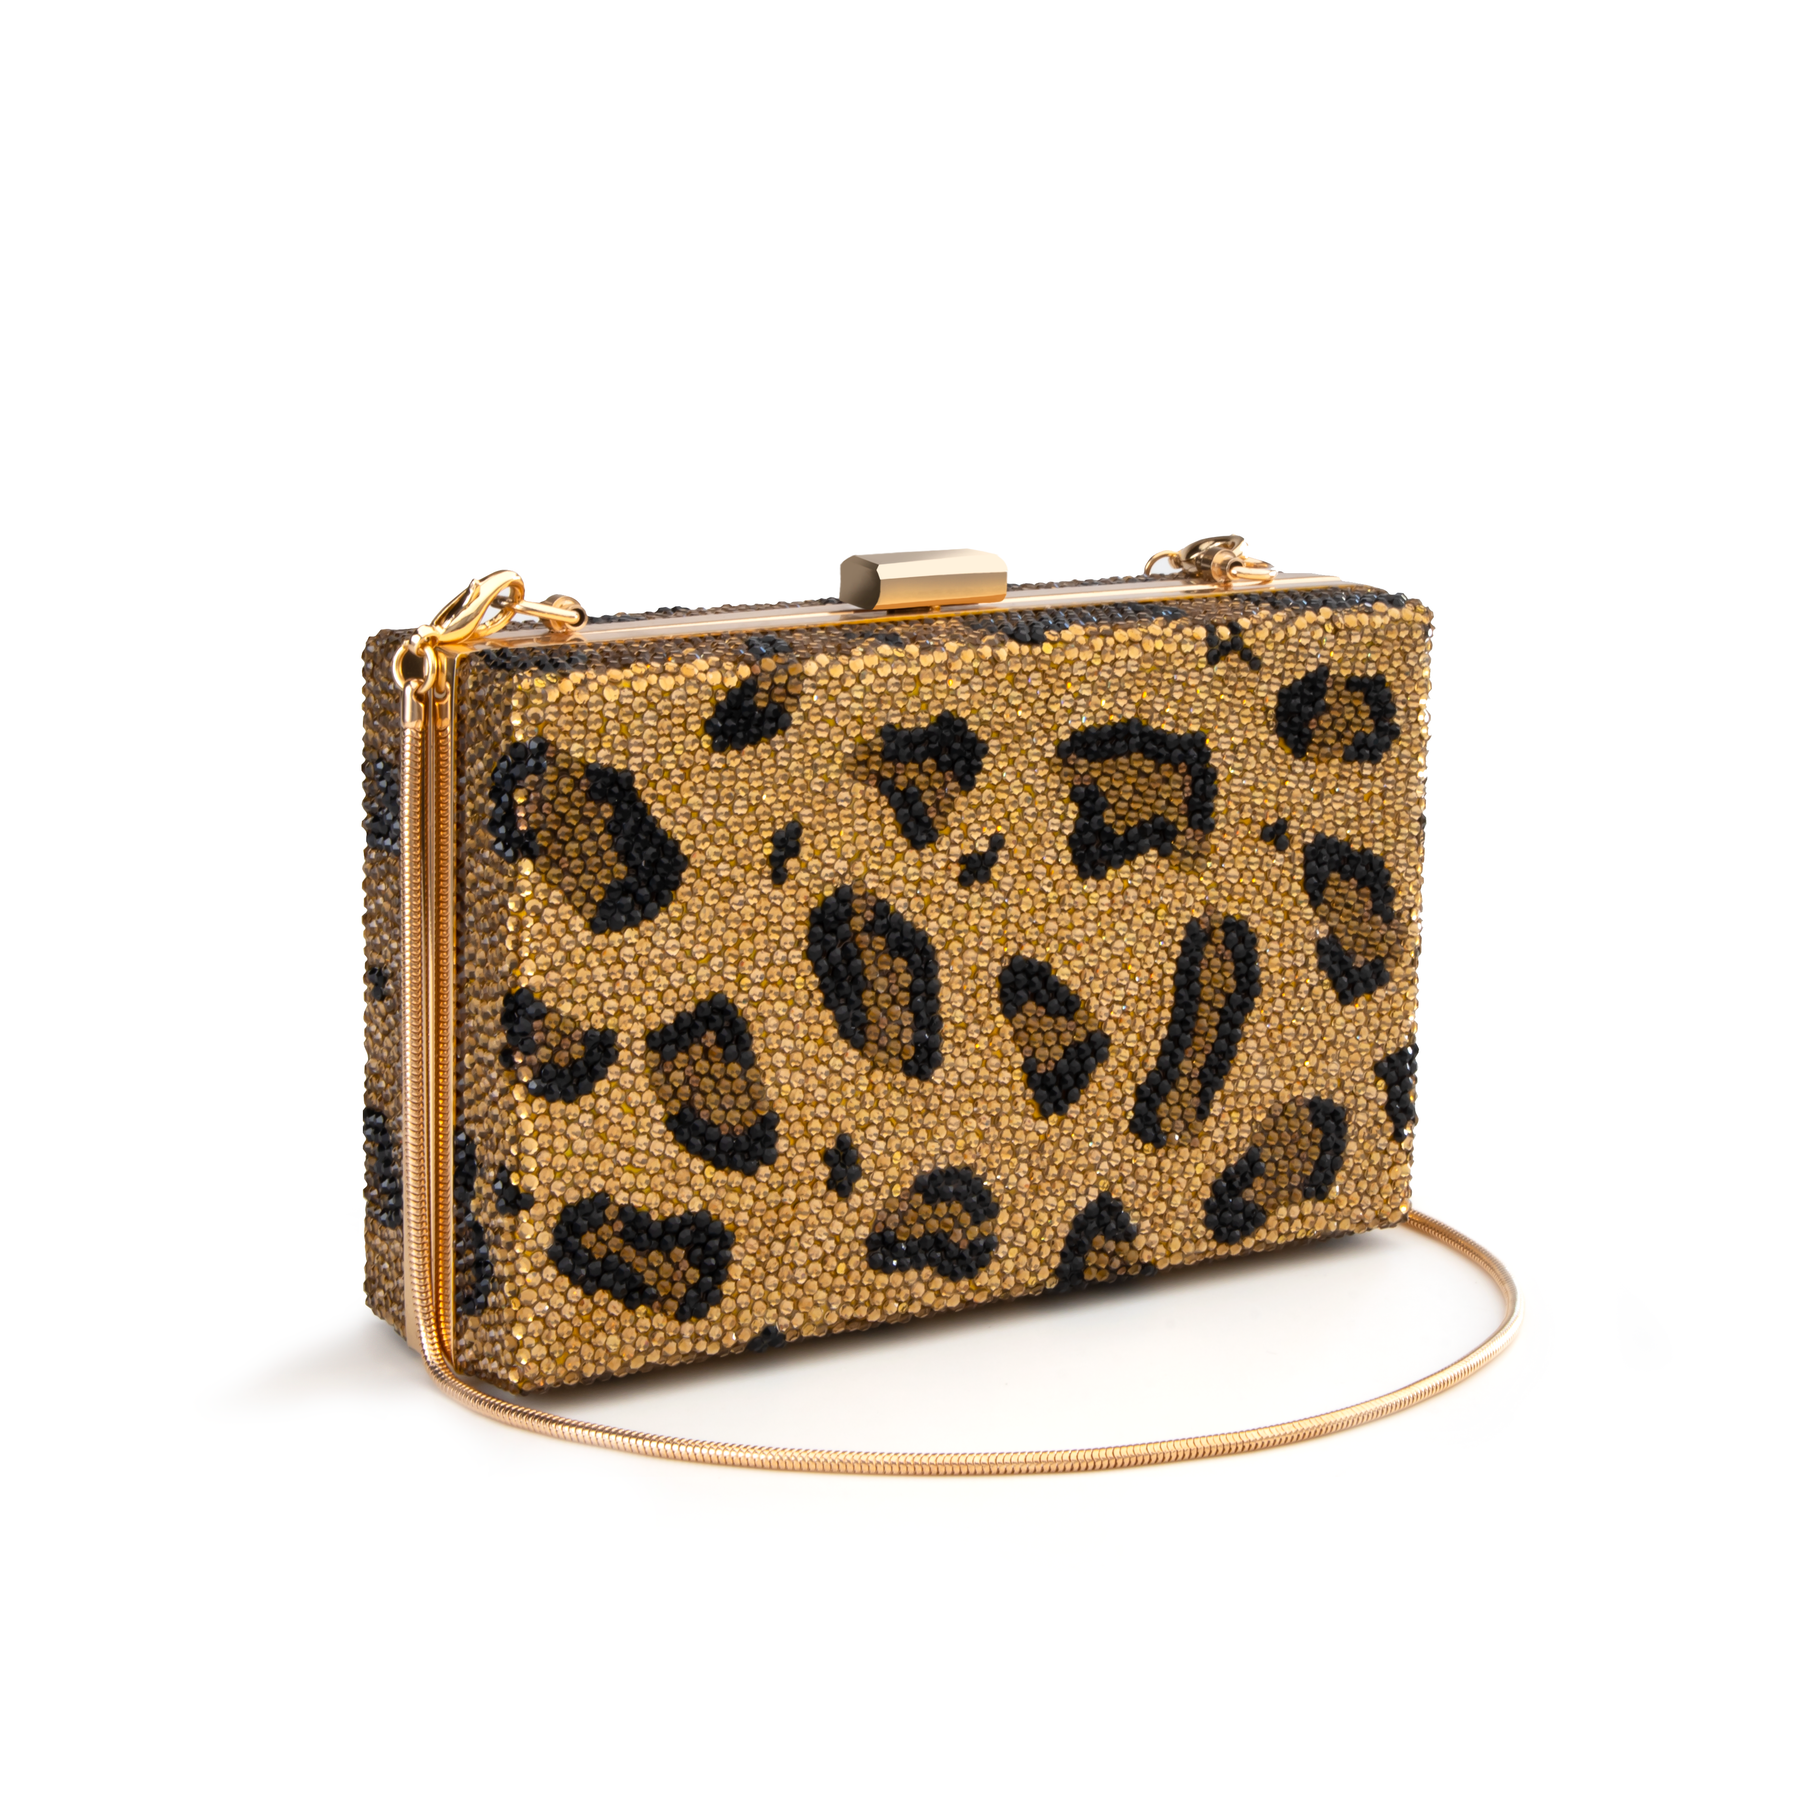 Leopard Print Coin Purse - The Old Smithy